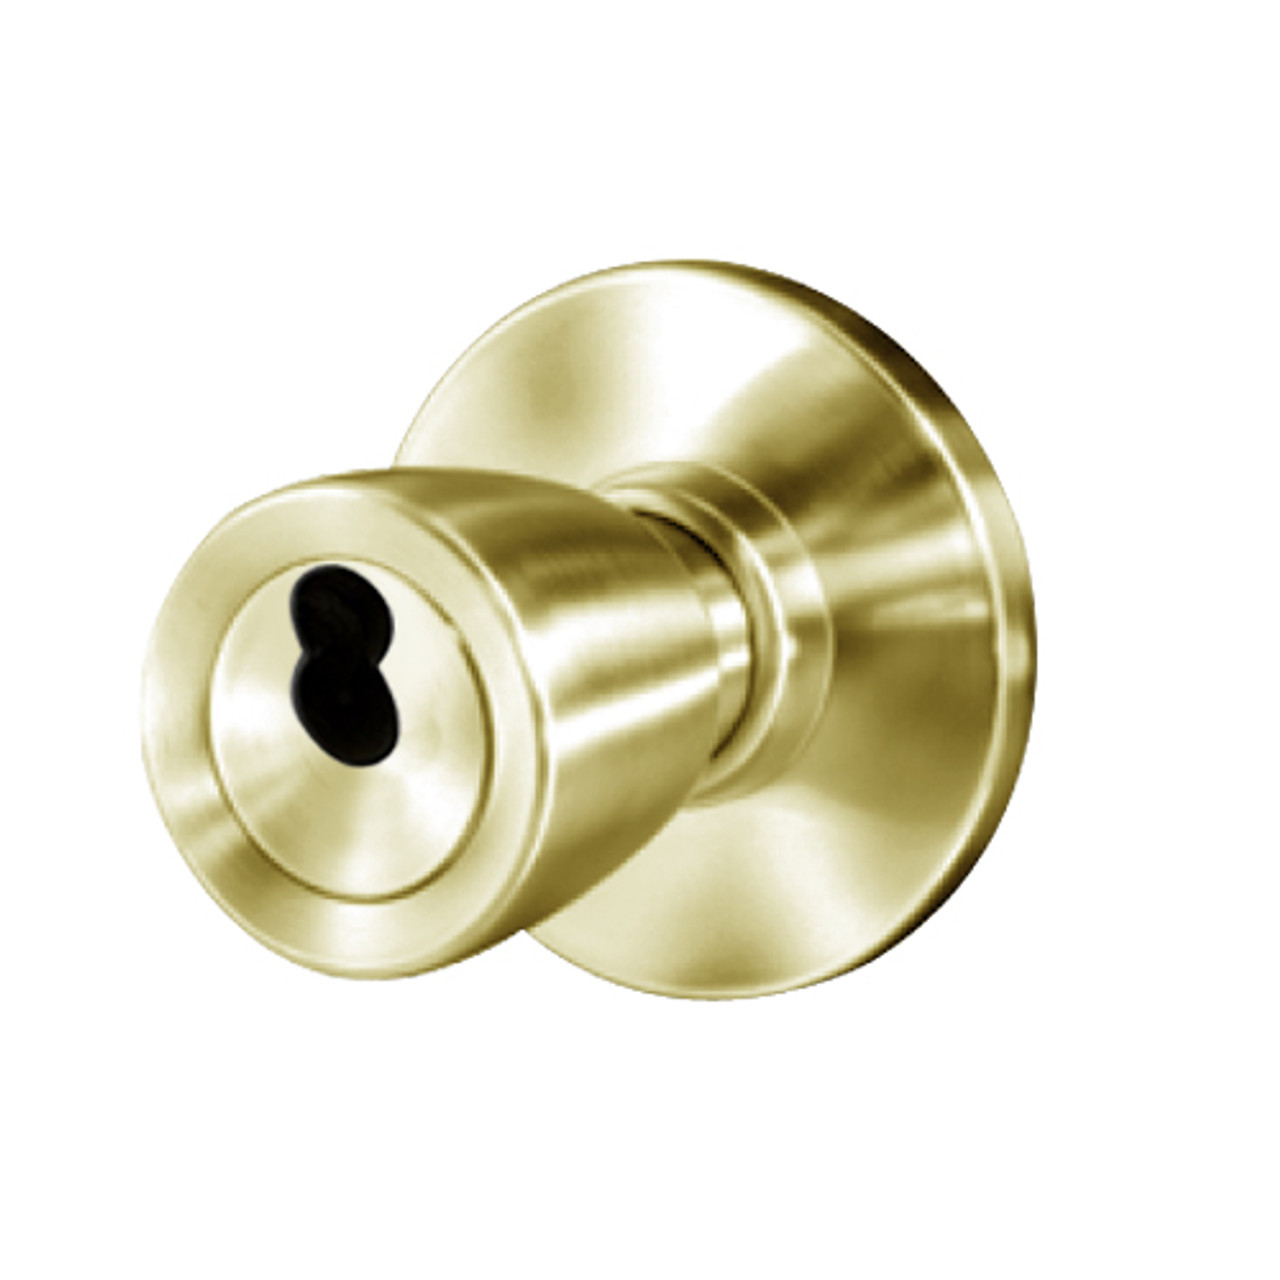 8K57YD6AS3606 Best 8K Series Exit Heavy Duty Cylindrical Knob Locks with Tulip Style in Satin Brass